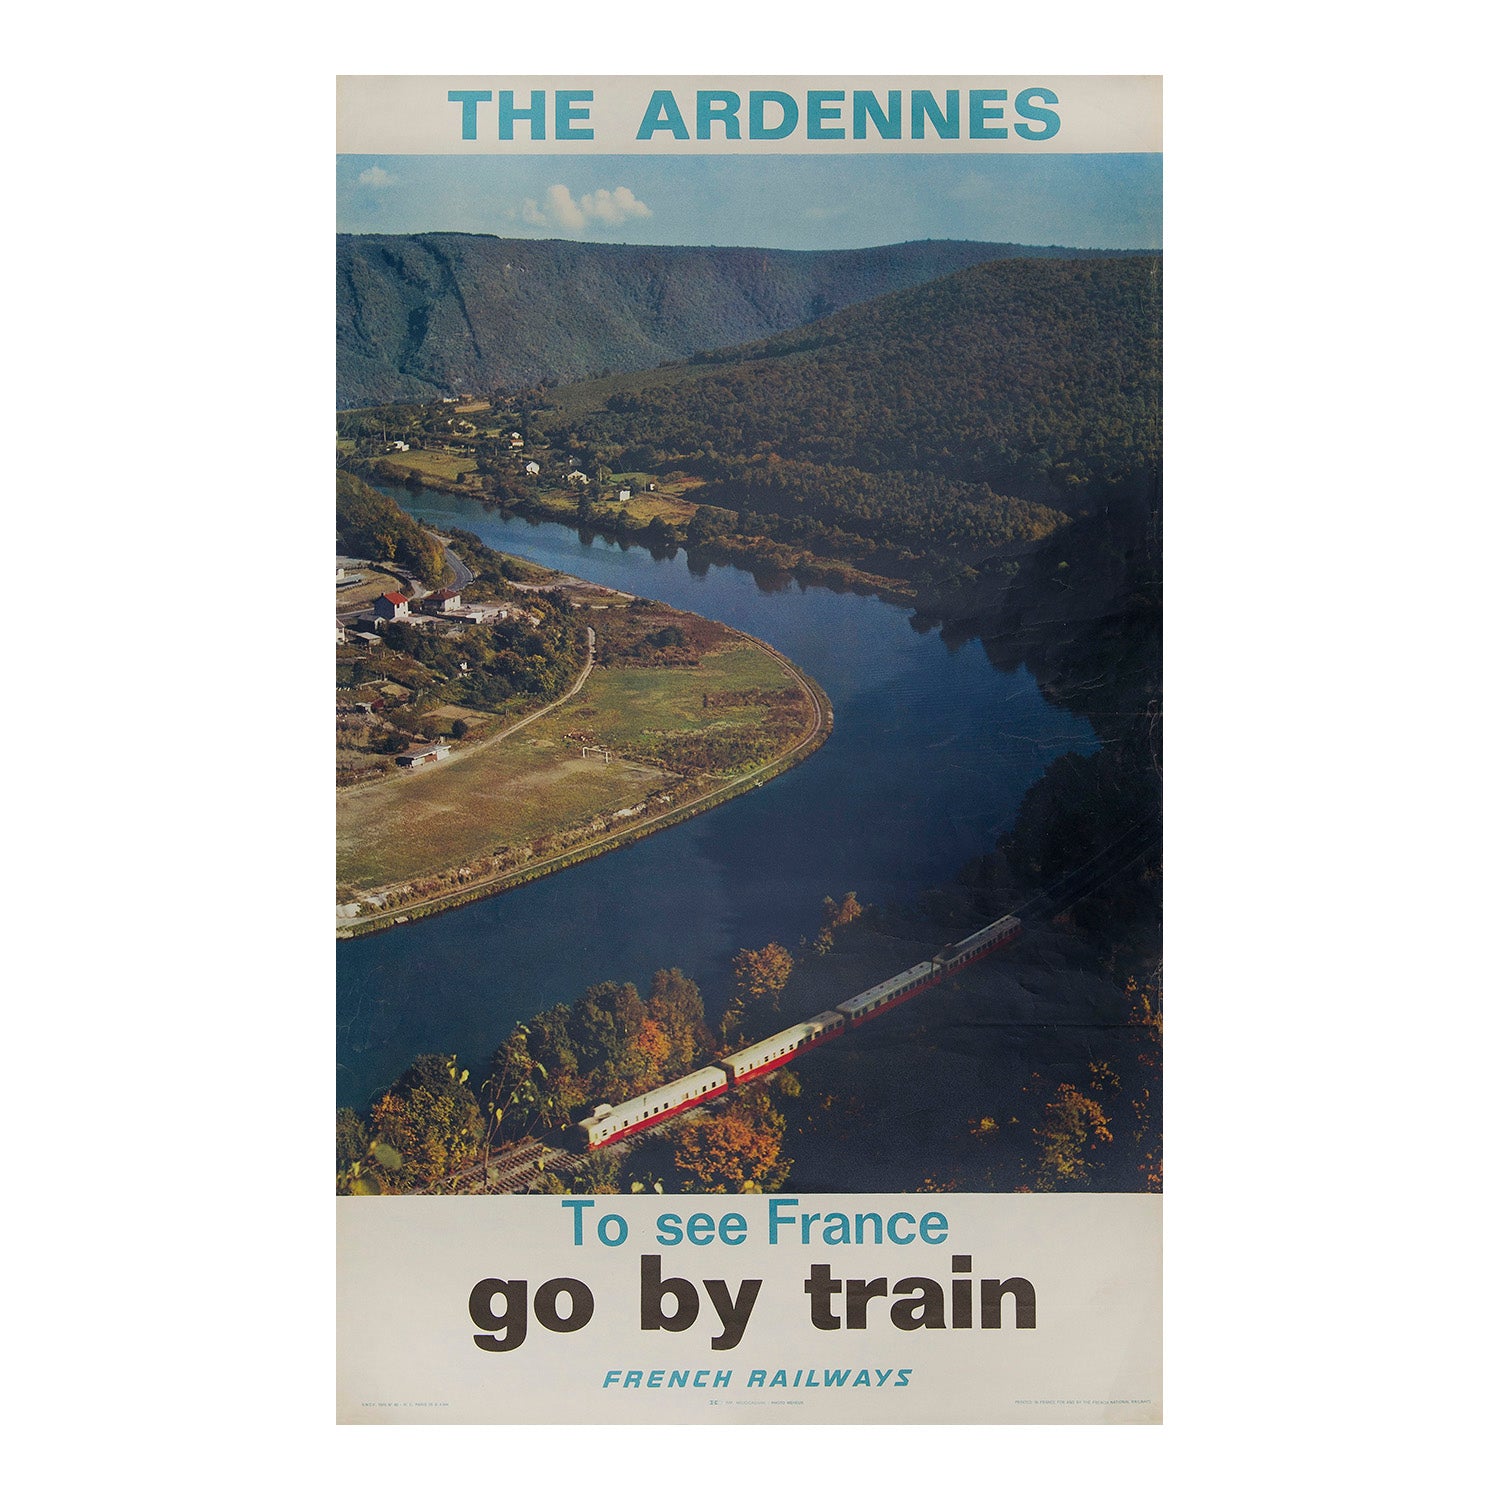 The Ardennes. To see France go by train. French Railways